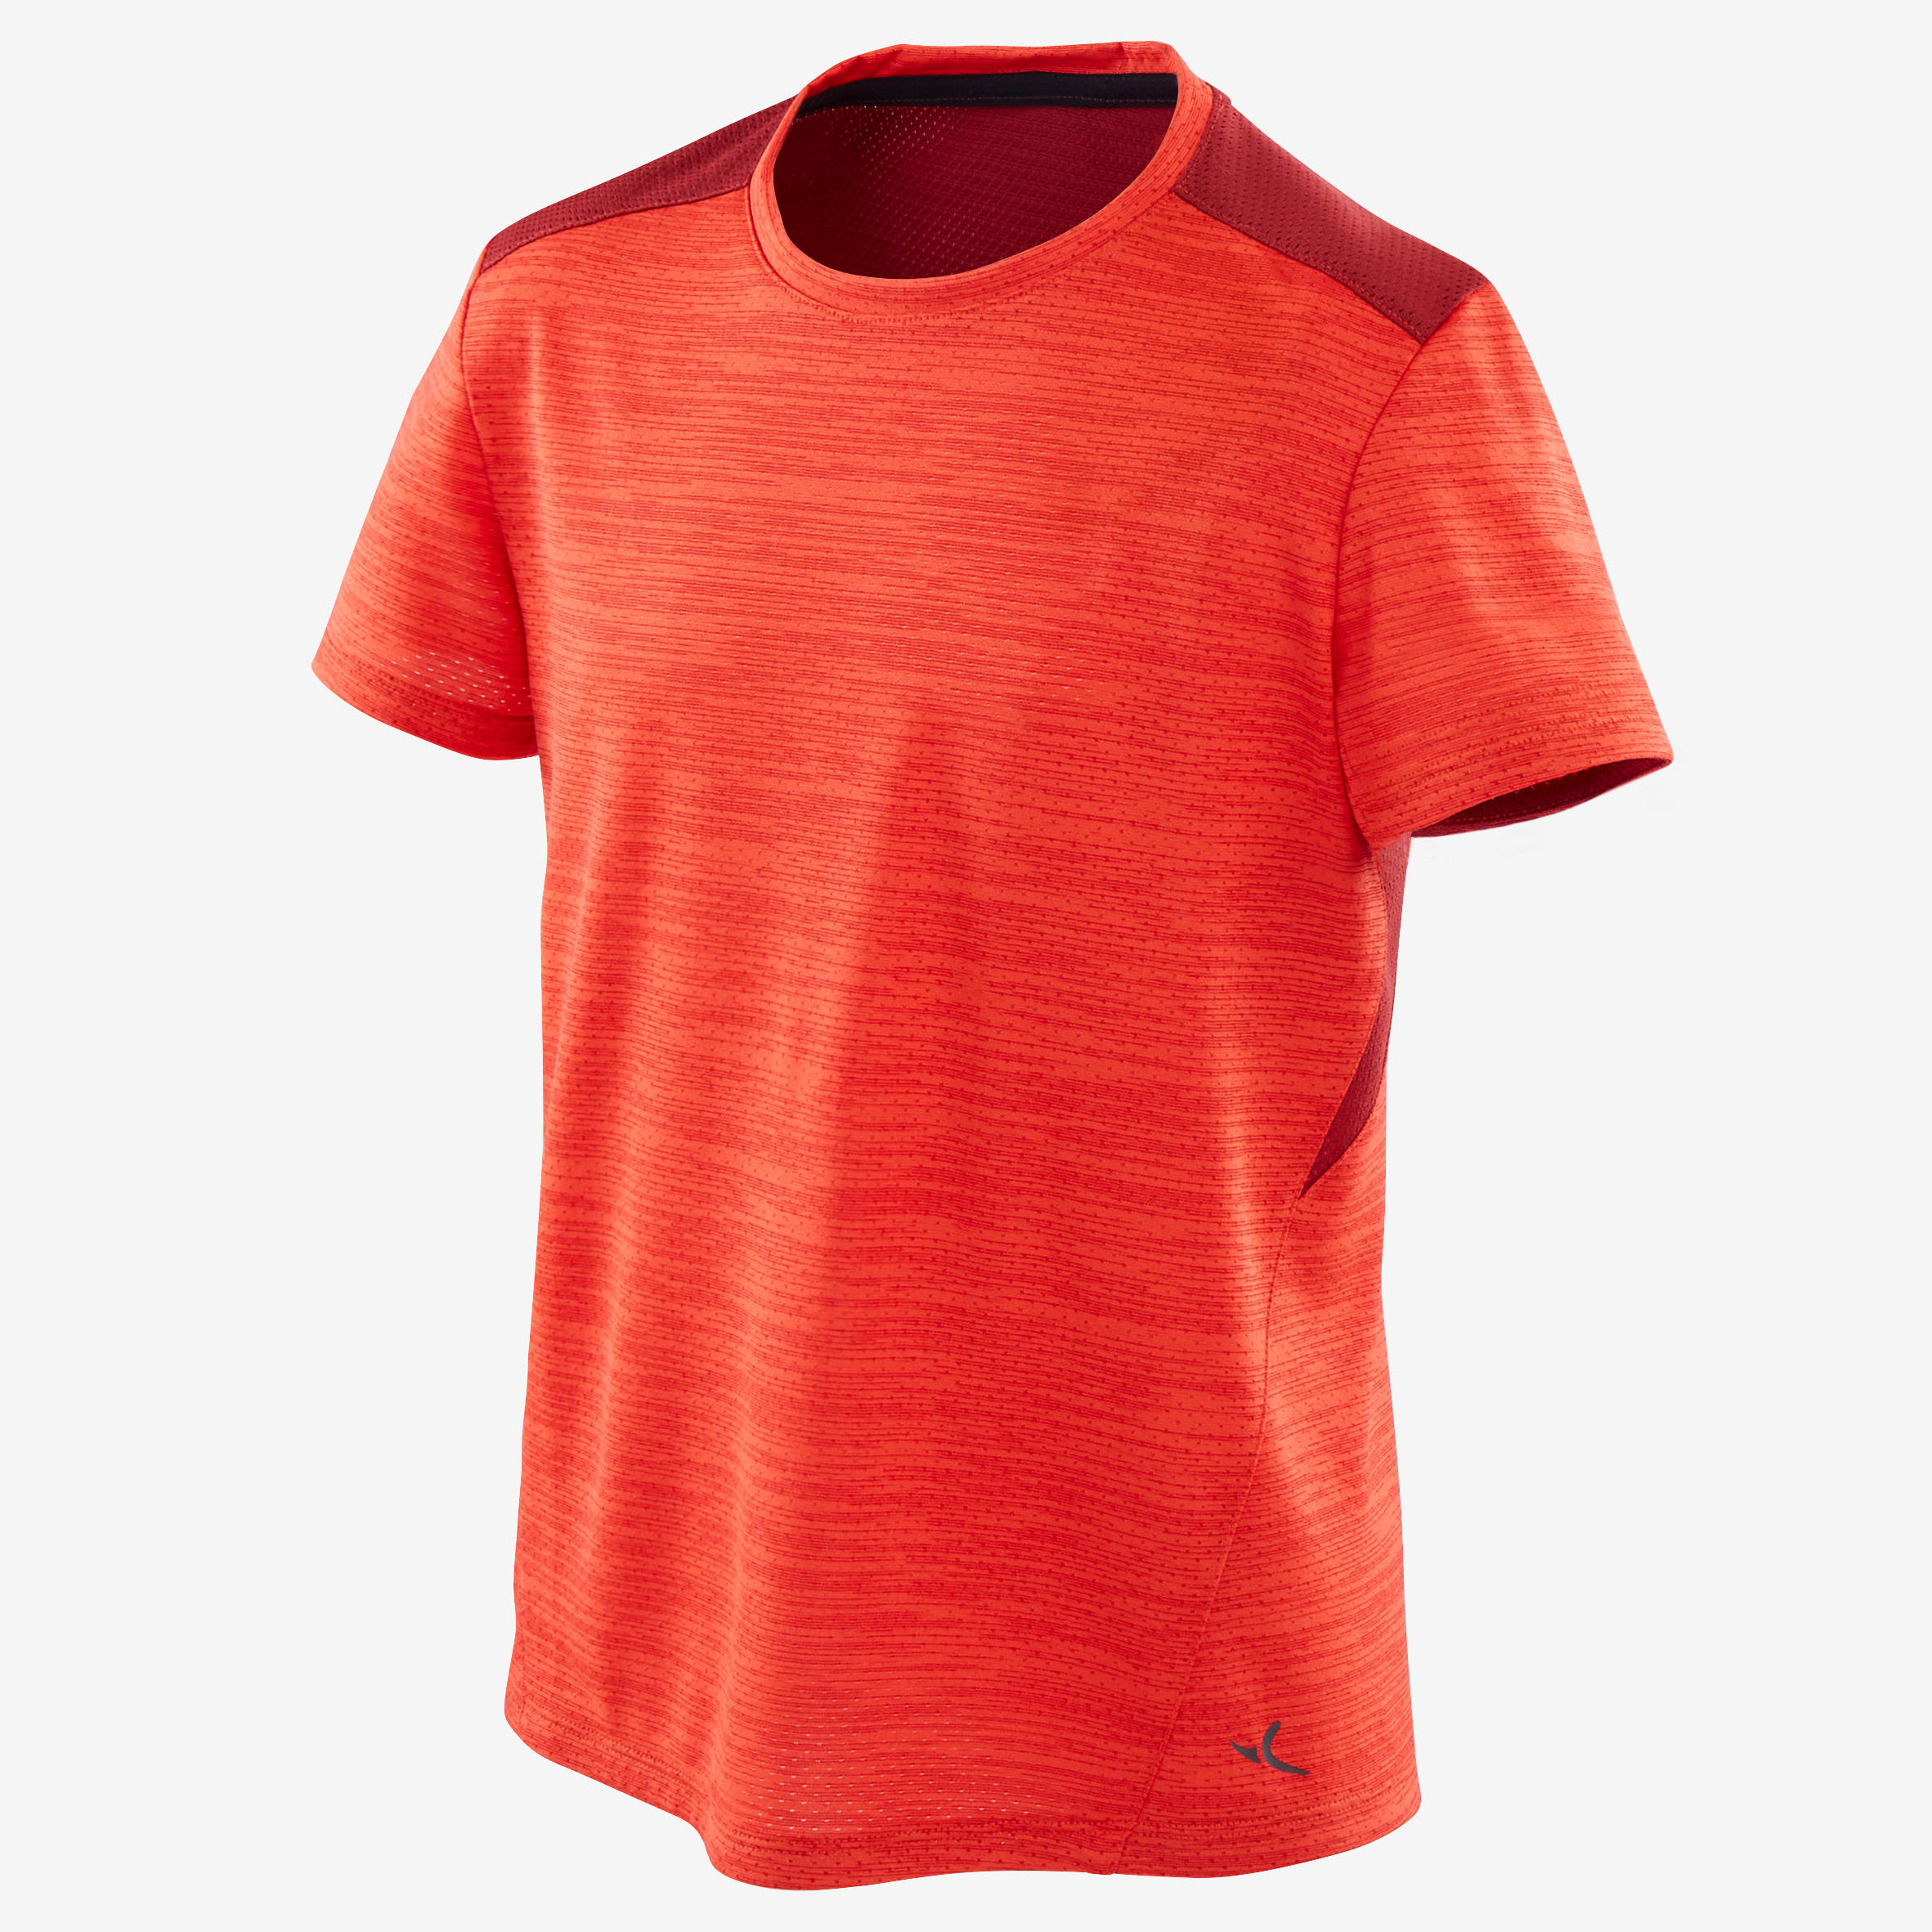 Boys' Breathable Synthetic Short-Sleeved Gym T-Shirt S500 - Red 2/5